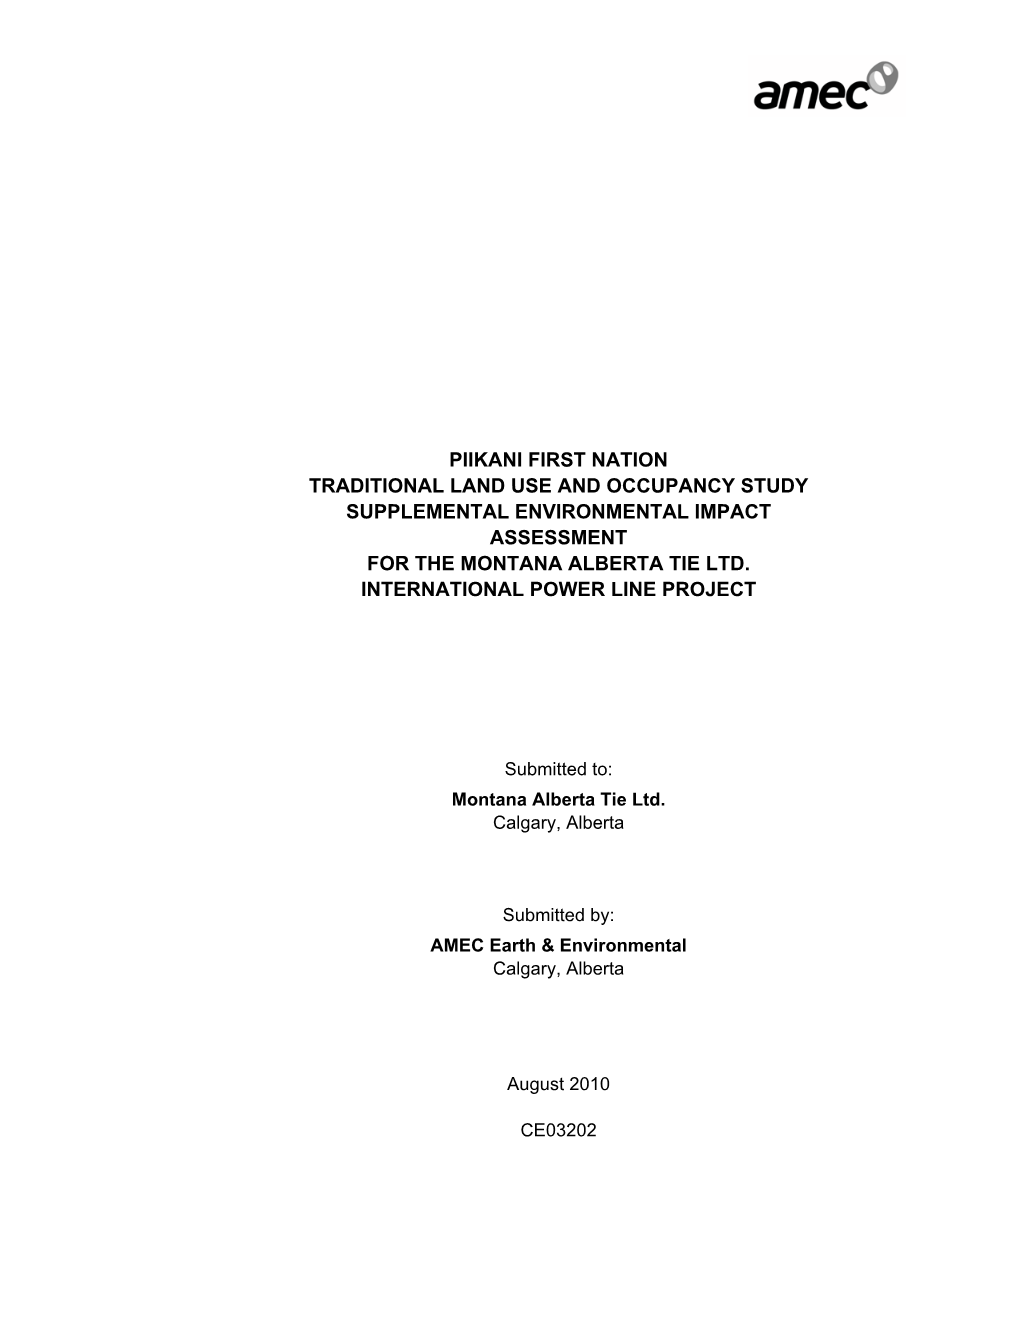 Piikani First Nation Traditional Land Use and Occupancy Study Supplemental Environmental Impact Assessment for the Montana Alberta Tie Ltd